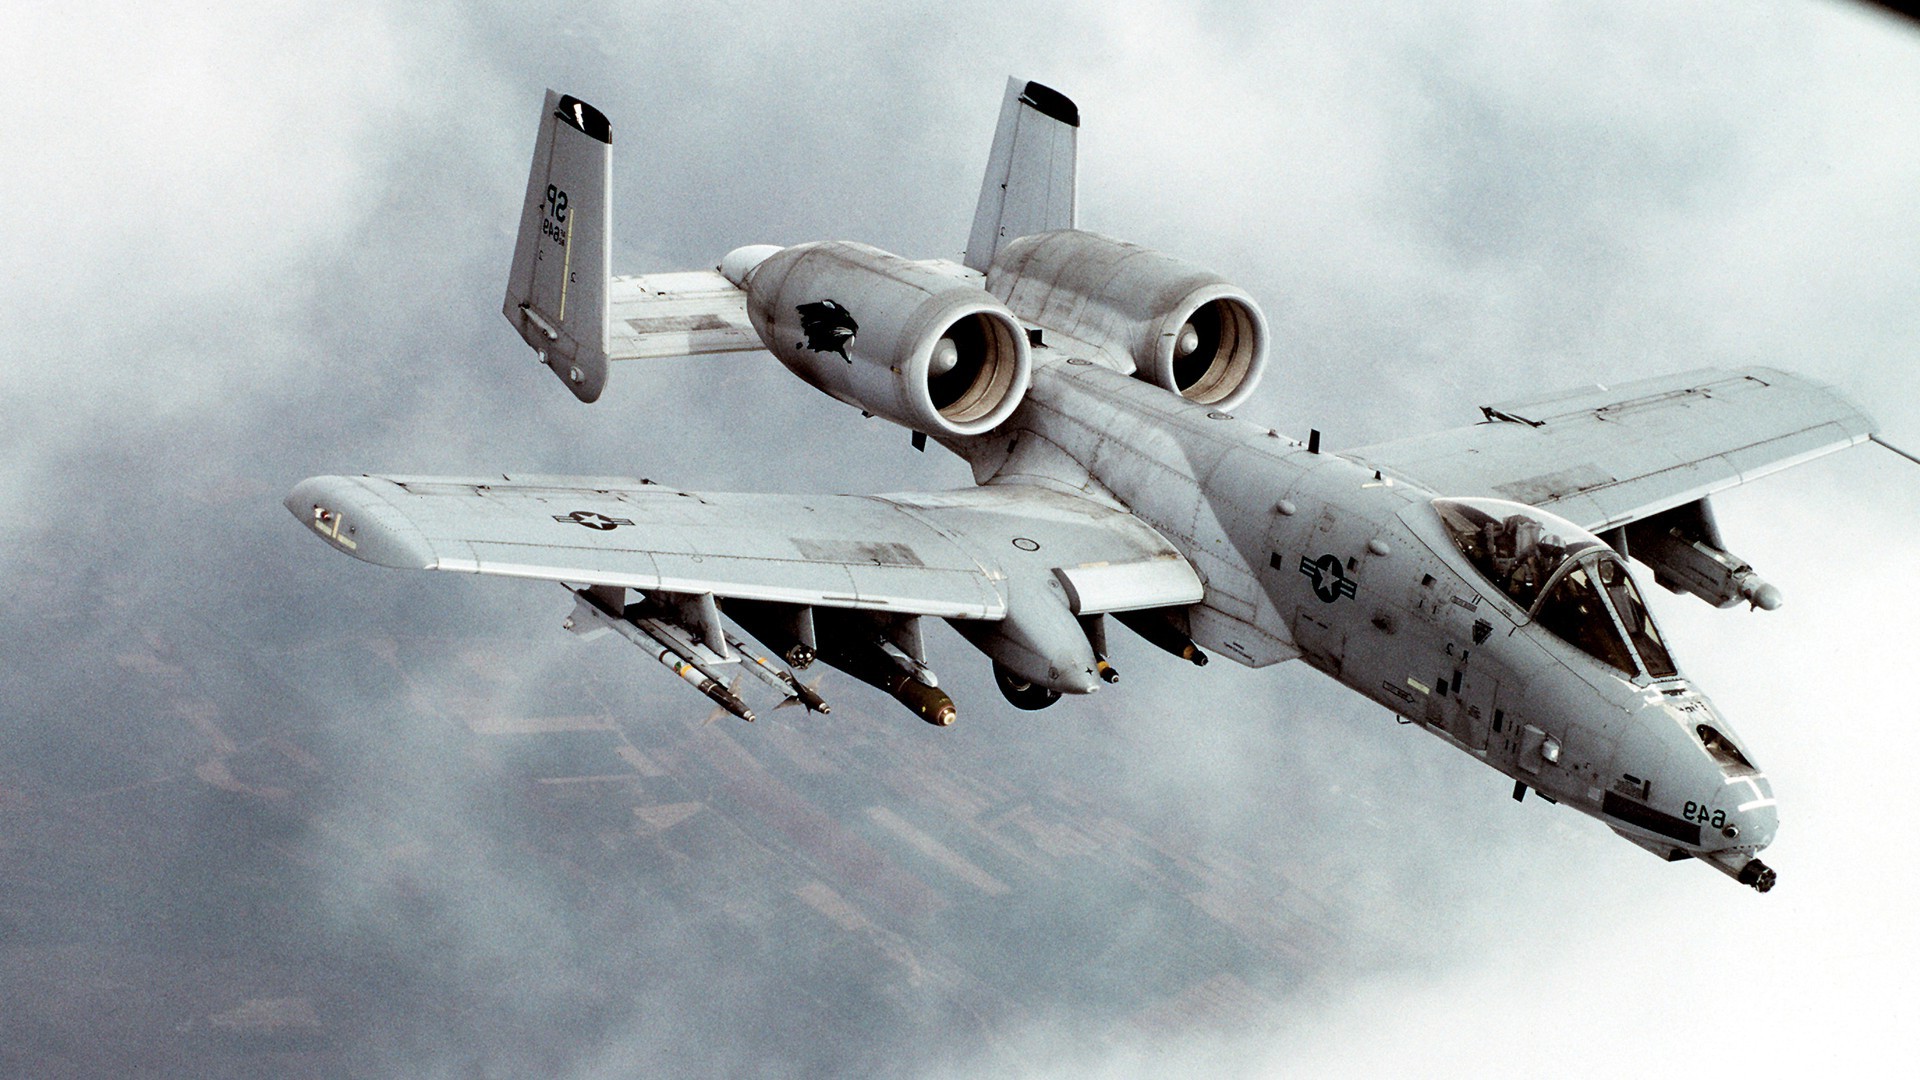 A10 Warthog Airplane Military Aircraft Jet Fighter